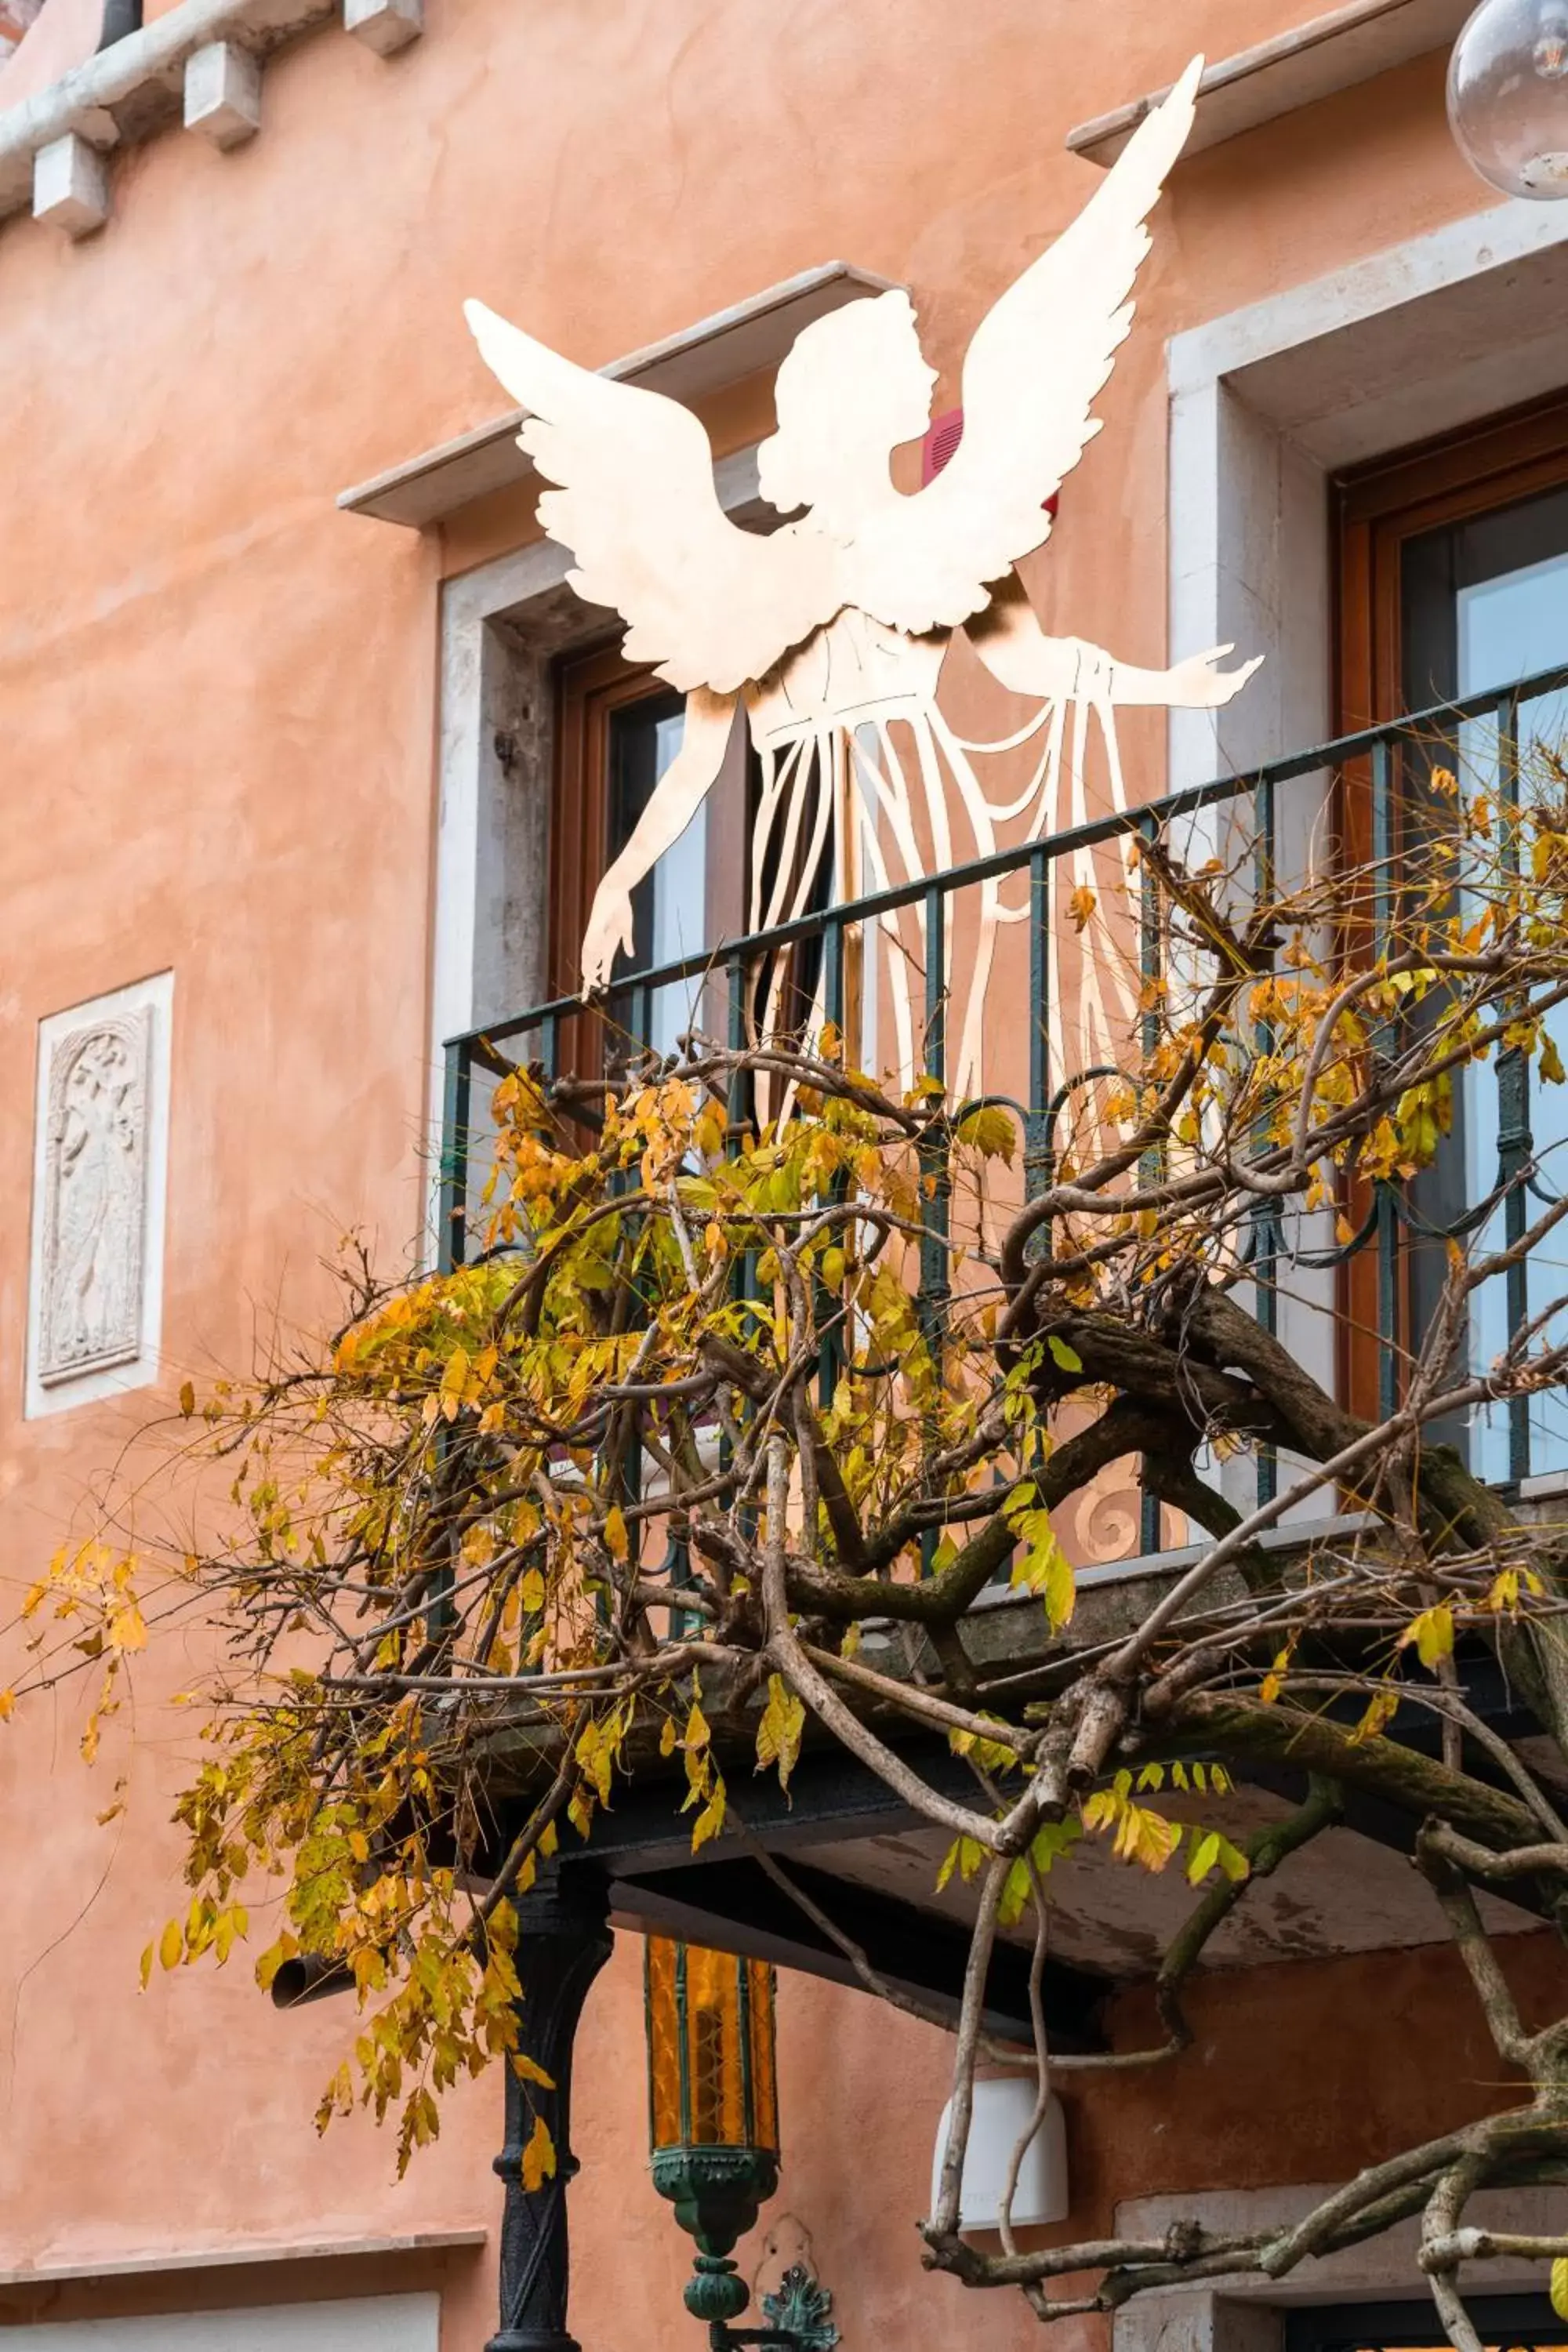 Decorative detail in Excess Venice Boutique Hotel & Private Spa - Adults Only